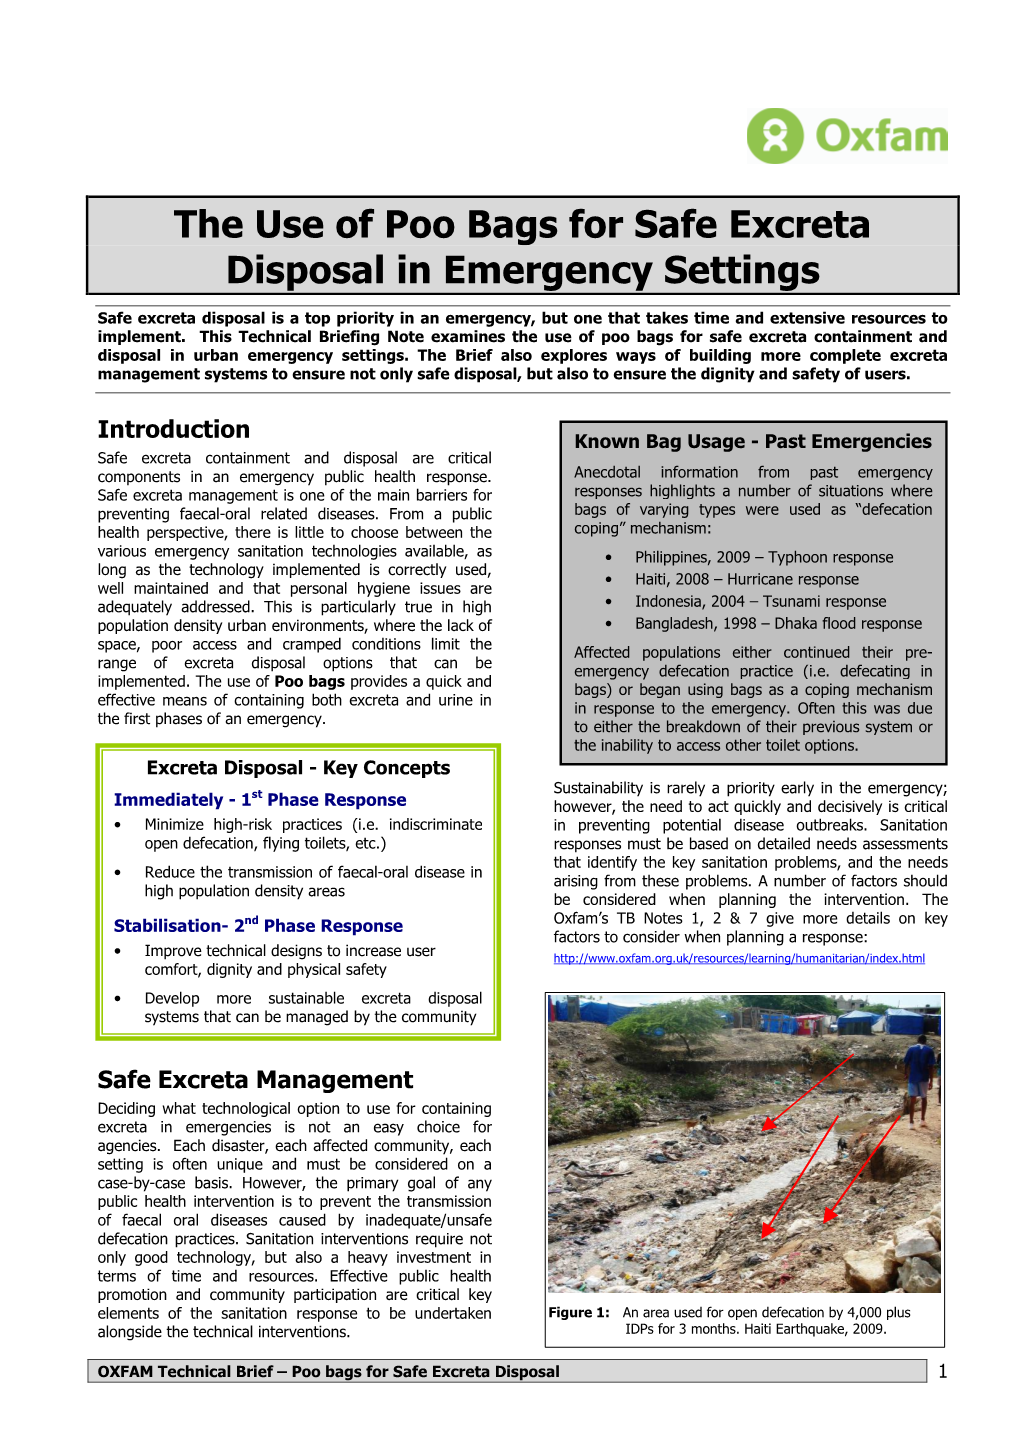 The Use of Poo Bags for Safe Excreta Disposal in Emergency Settings